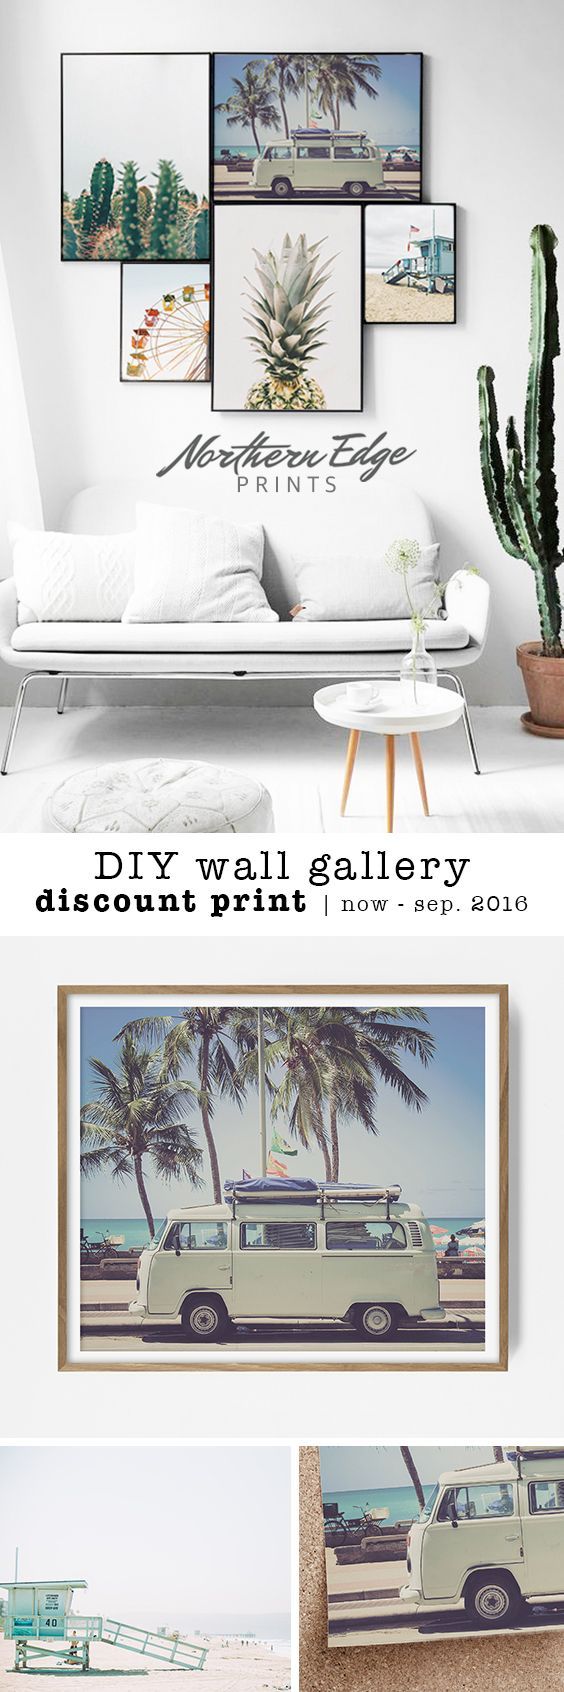 Inspo for vacation pictures and wall galleries